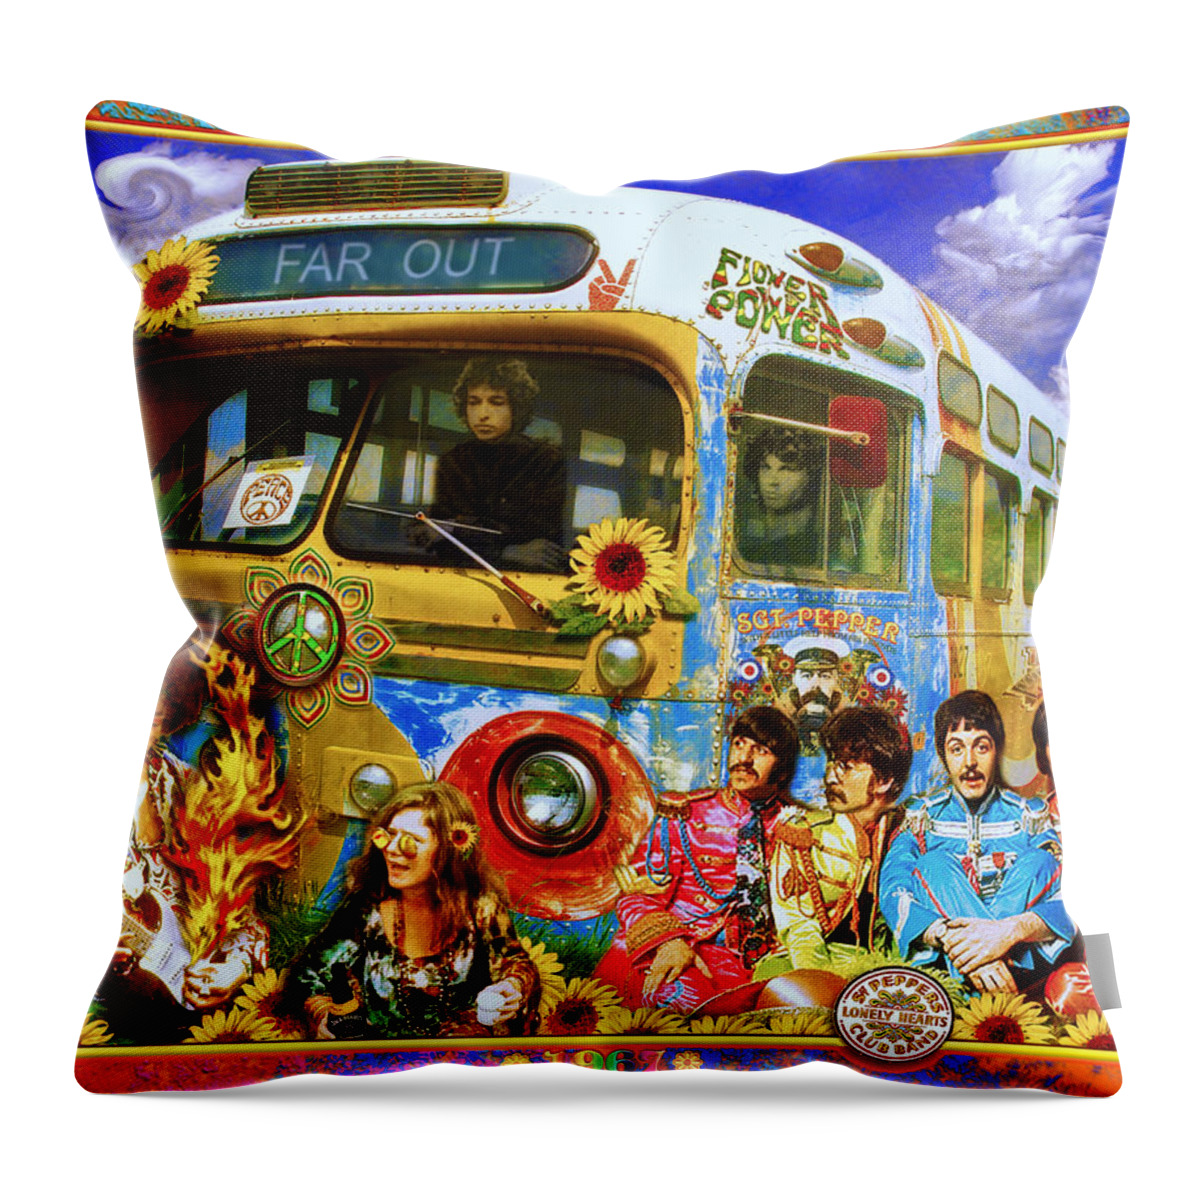 1967 Throw Pillow featuring the photograph 19 Sixty 7 by John Anderson